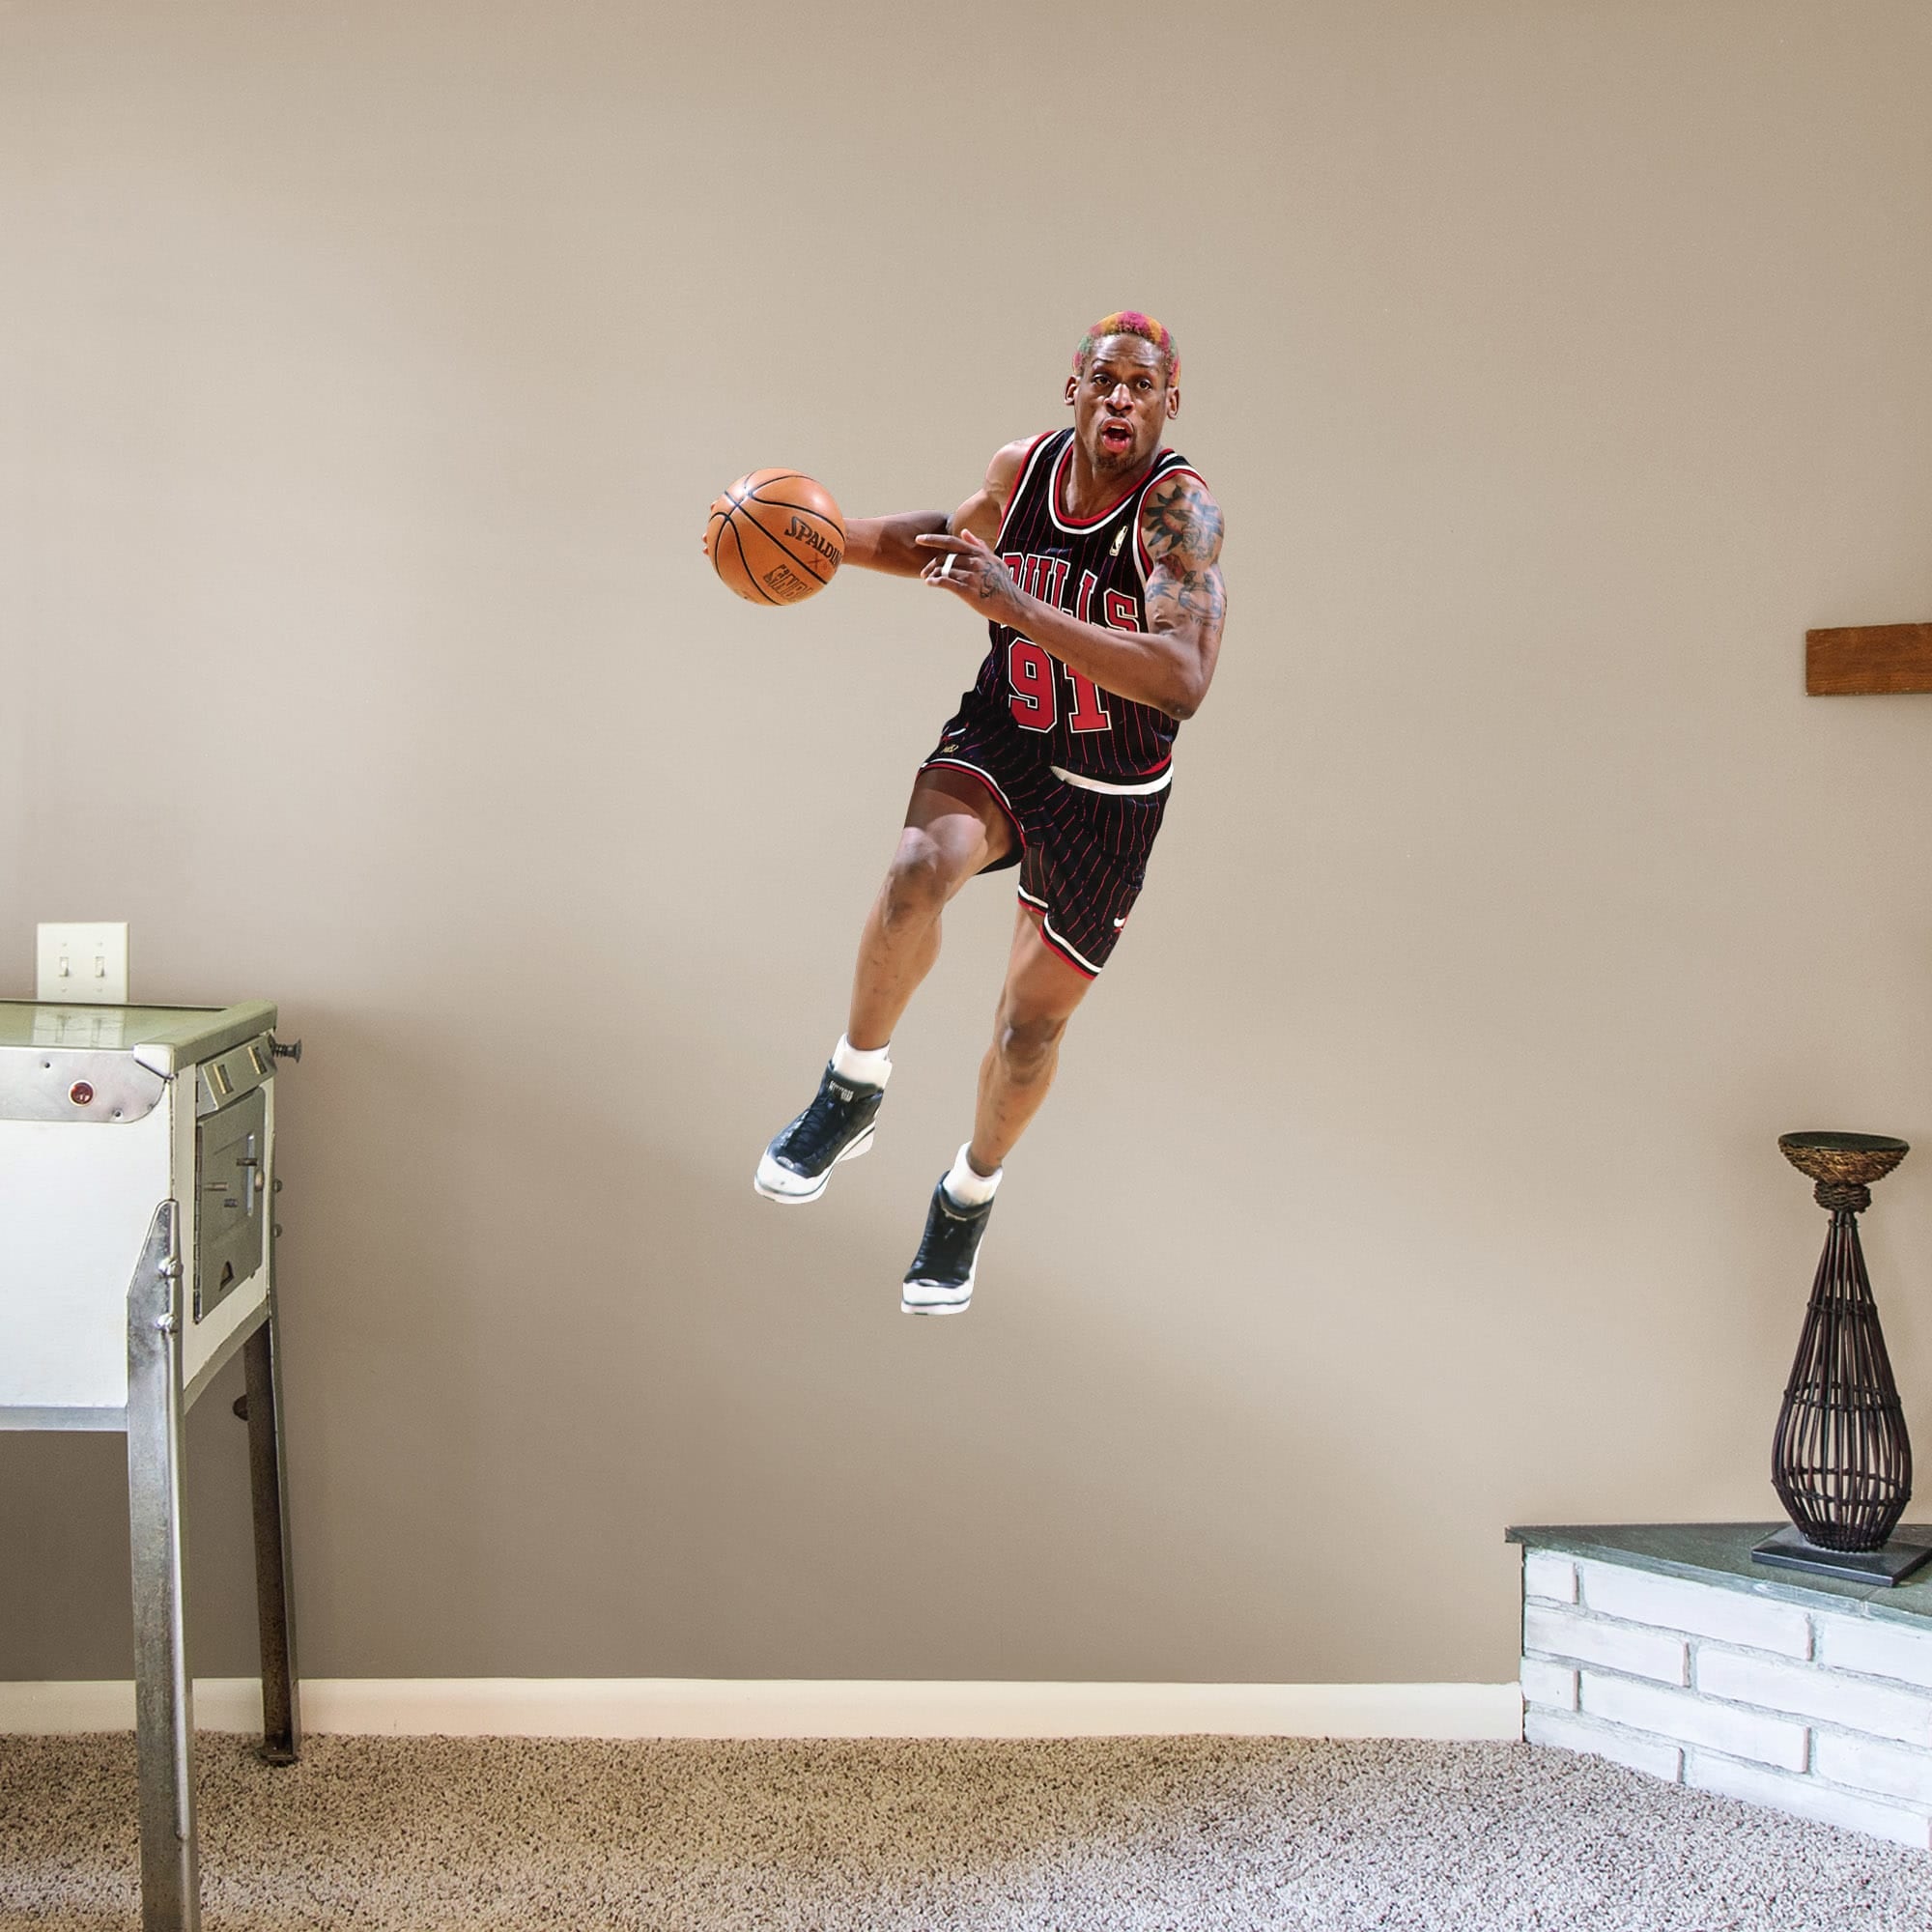 Dennis Rodman for Chicago Bulls - Officially Licensed NBA Removable Wall Decal Giant Athlete + 2 Decals (26.5"W x 51"H) by Fathe